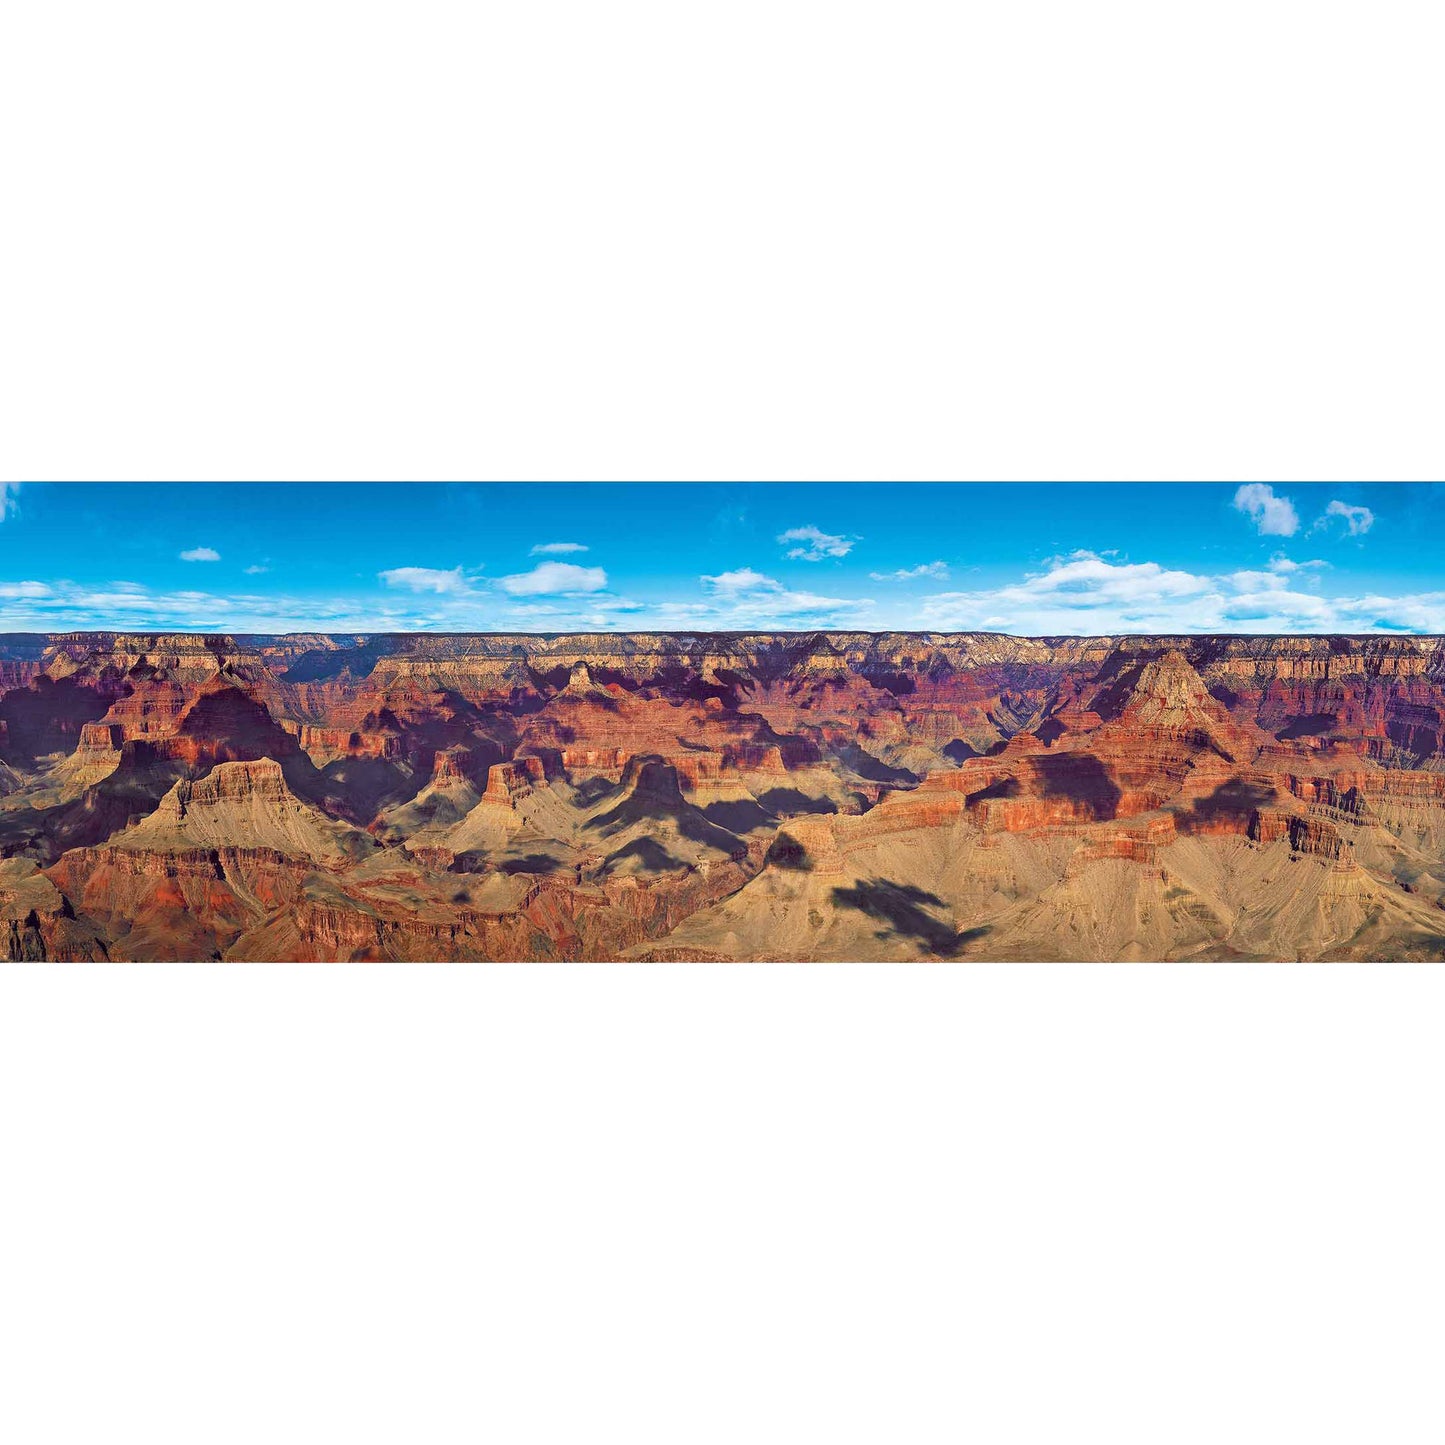 American Vista Panoramic - Grand Canyon 1000 Piece Jigsaw Puzzle by MasterPieces